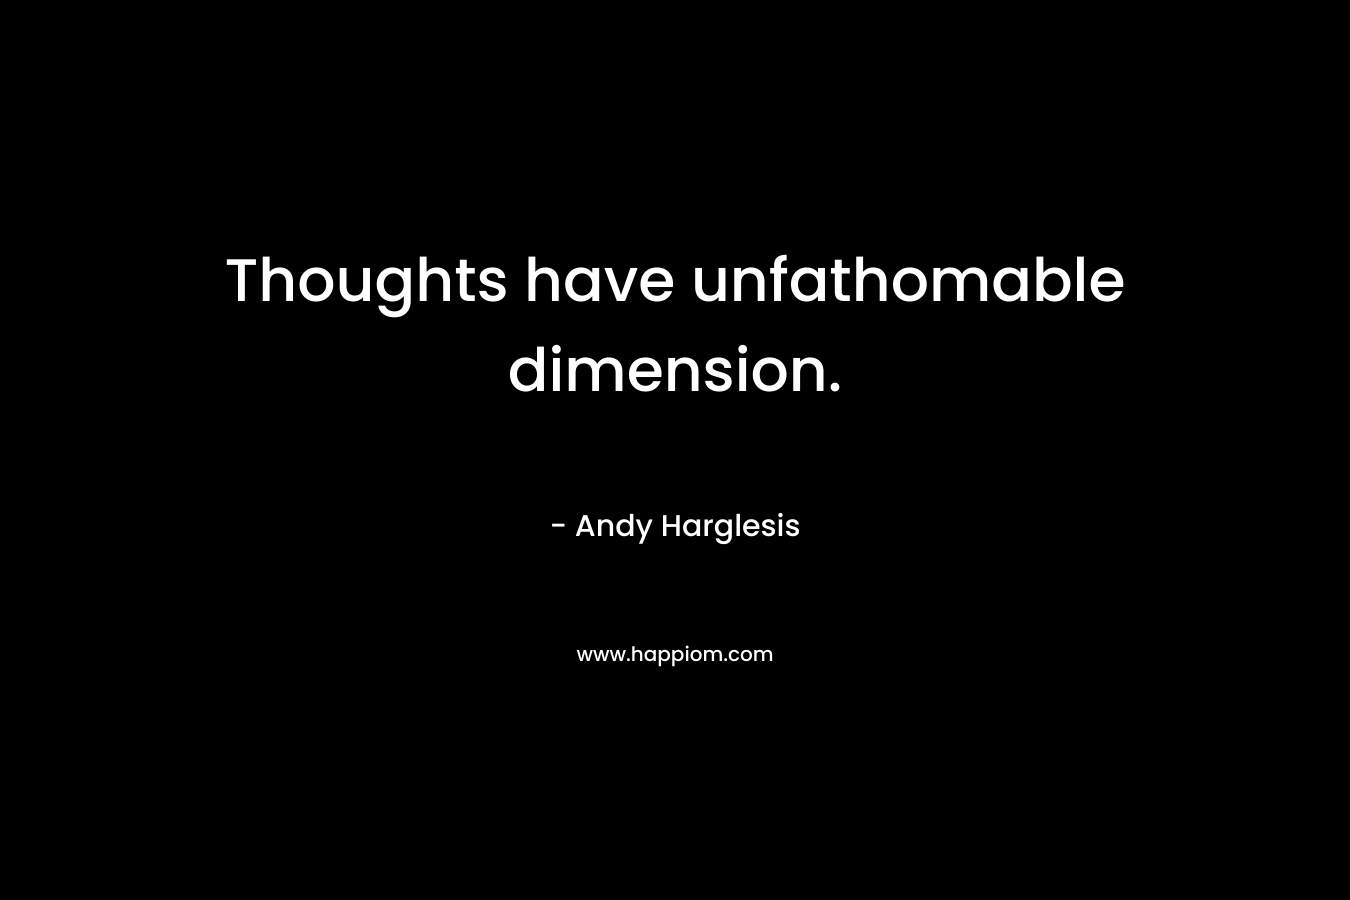 Thoughts have unfathomable dimension.